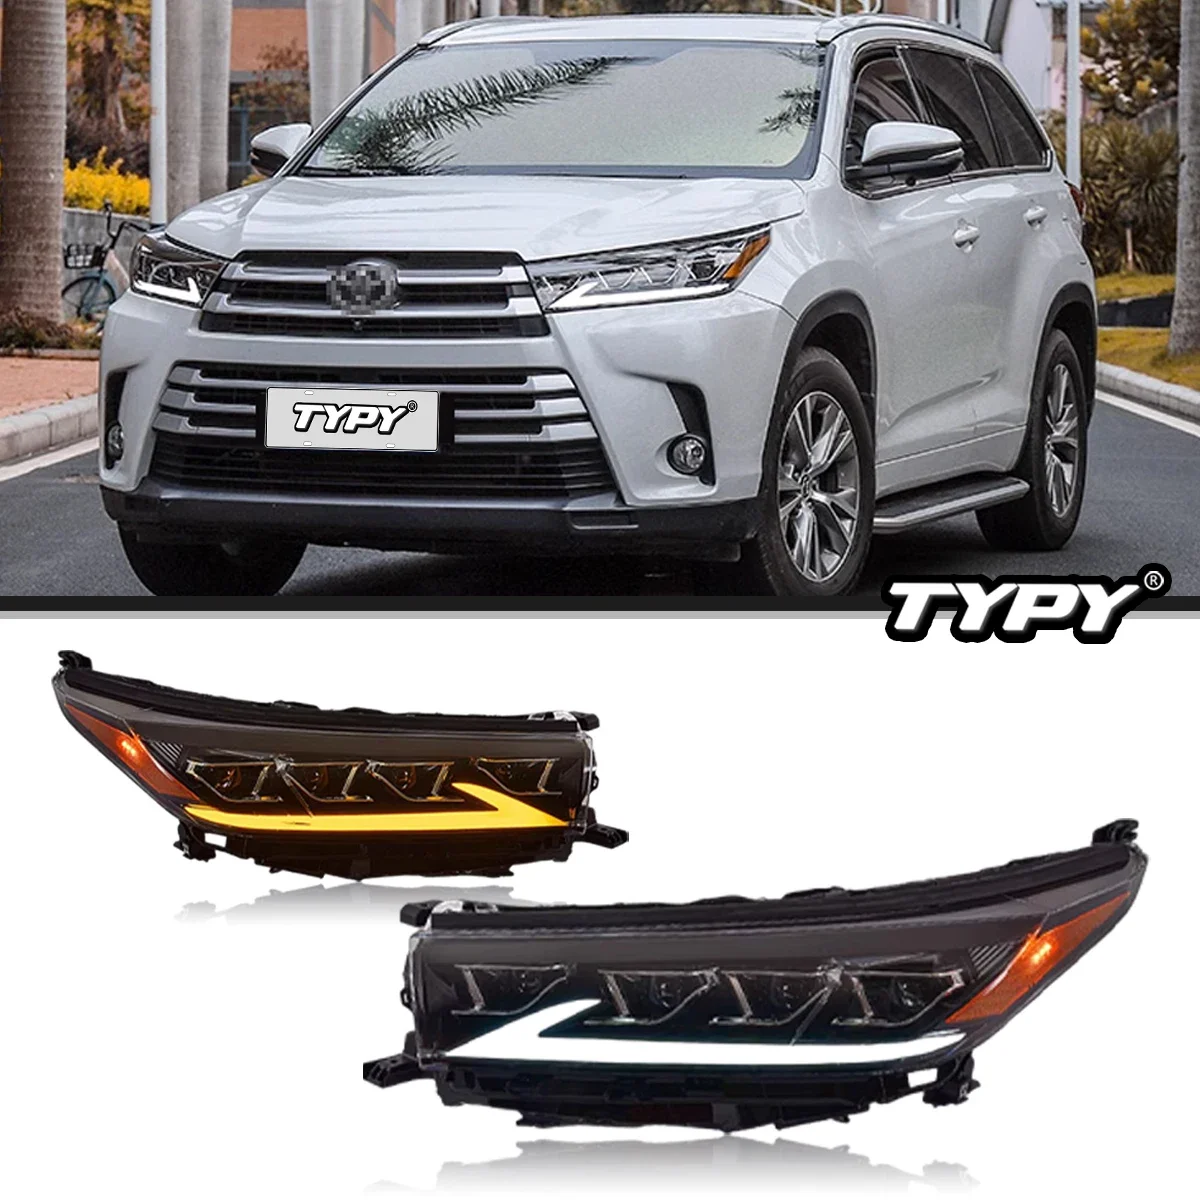 

TYPY Car Headlights For Toyota Highlander 2018-2021 LED Car Lamps Daytime Running Lights Dynamic Turn Signals Car Accessories